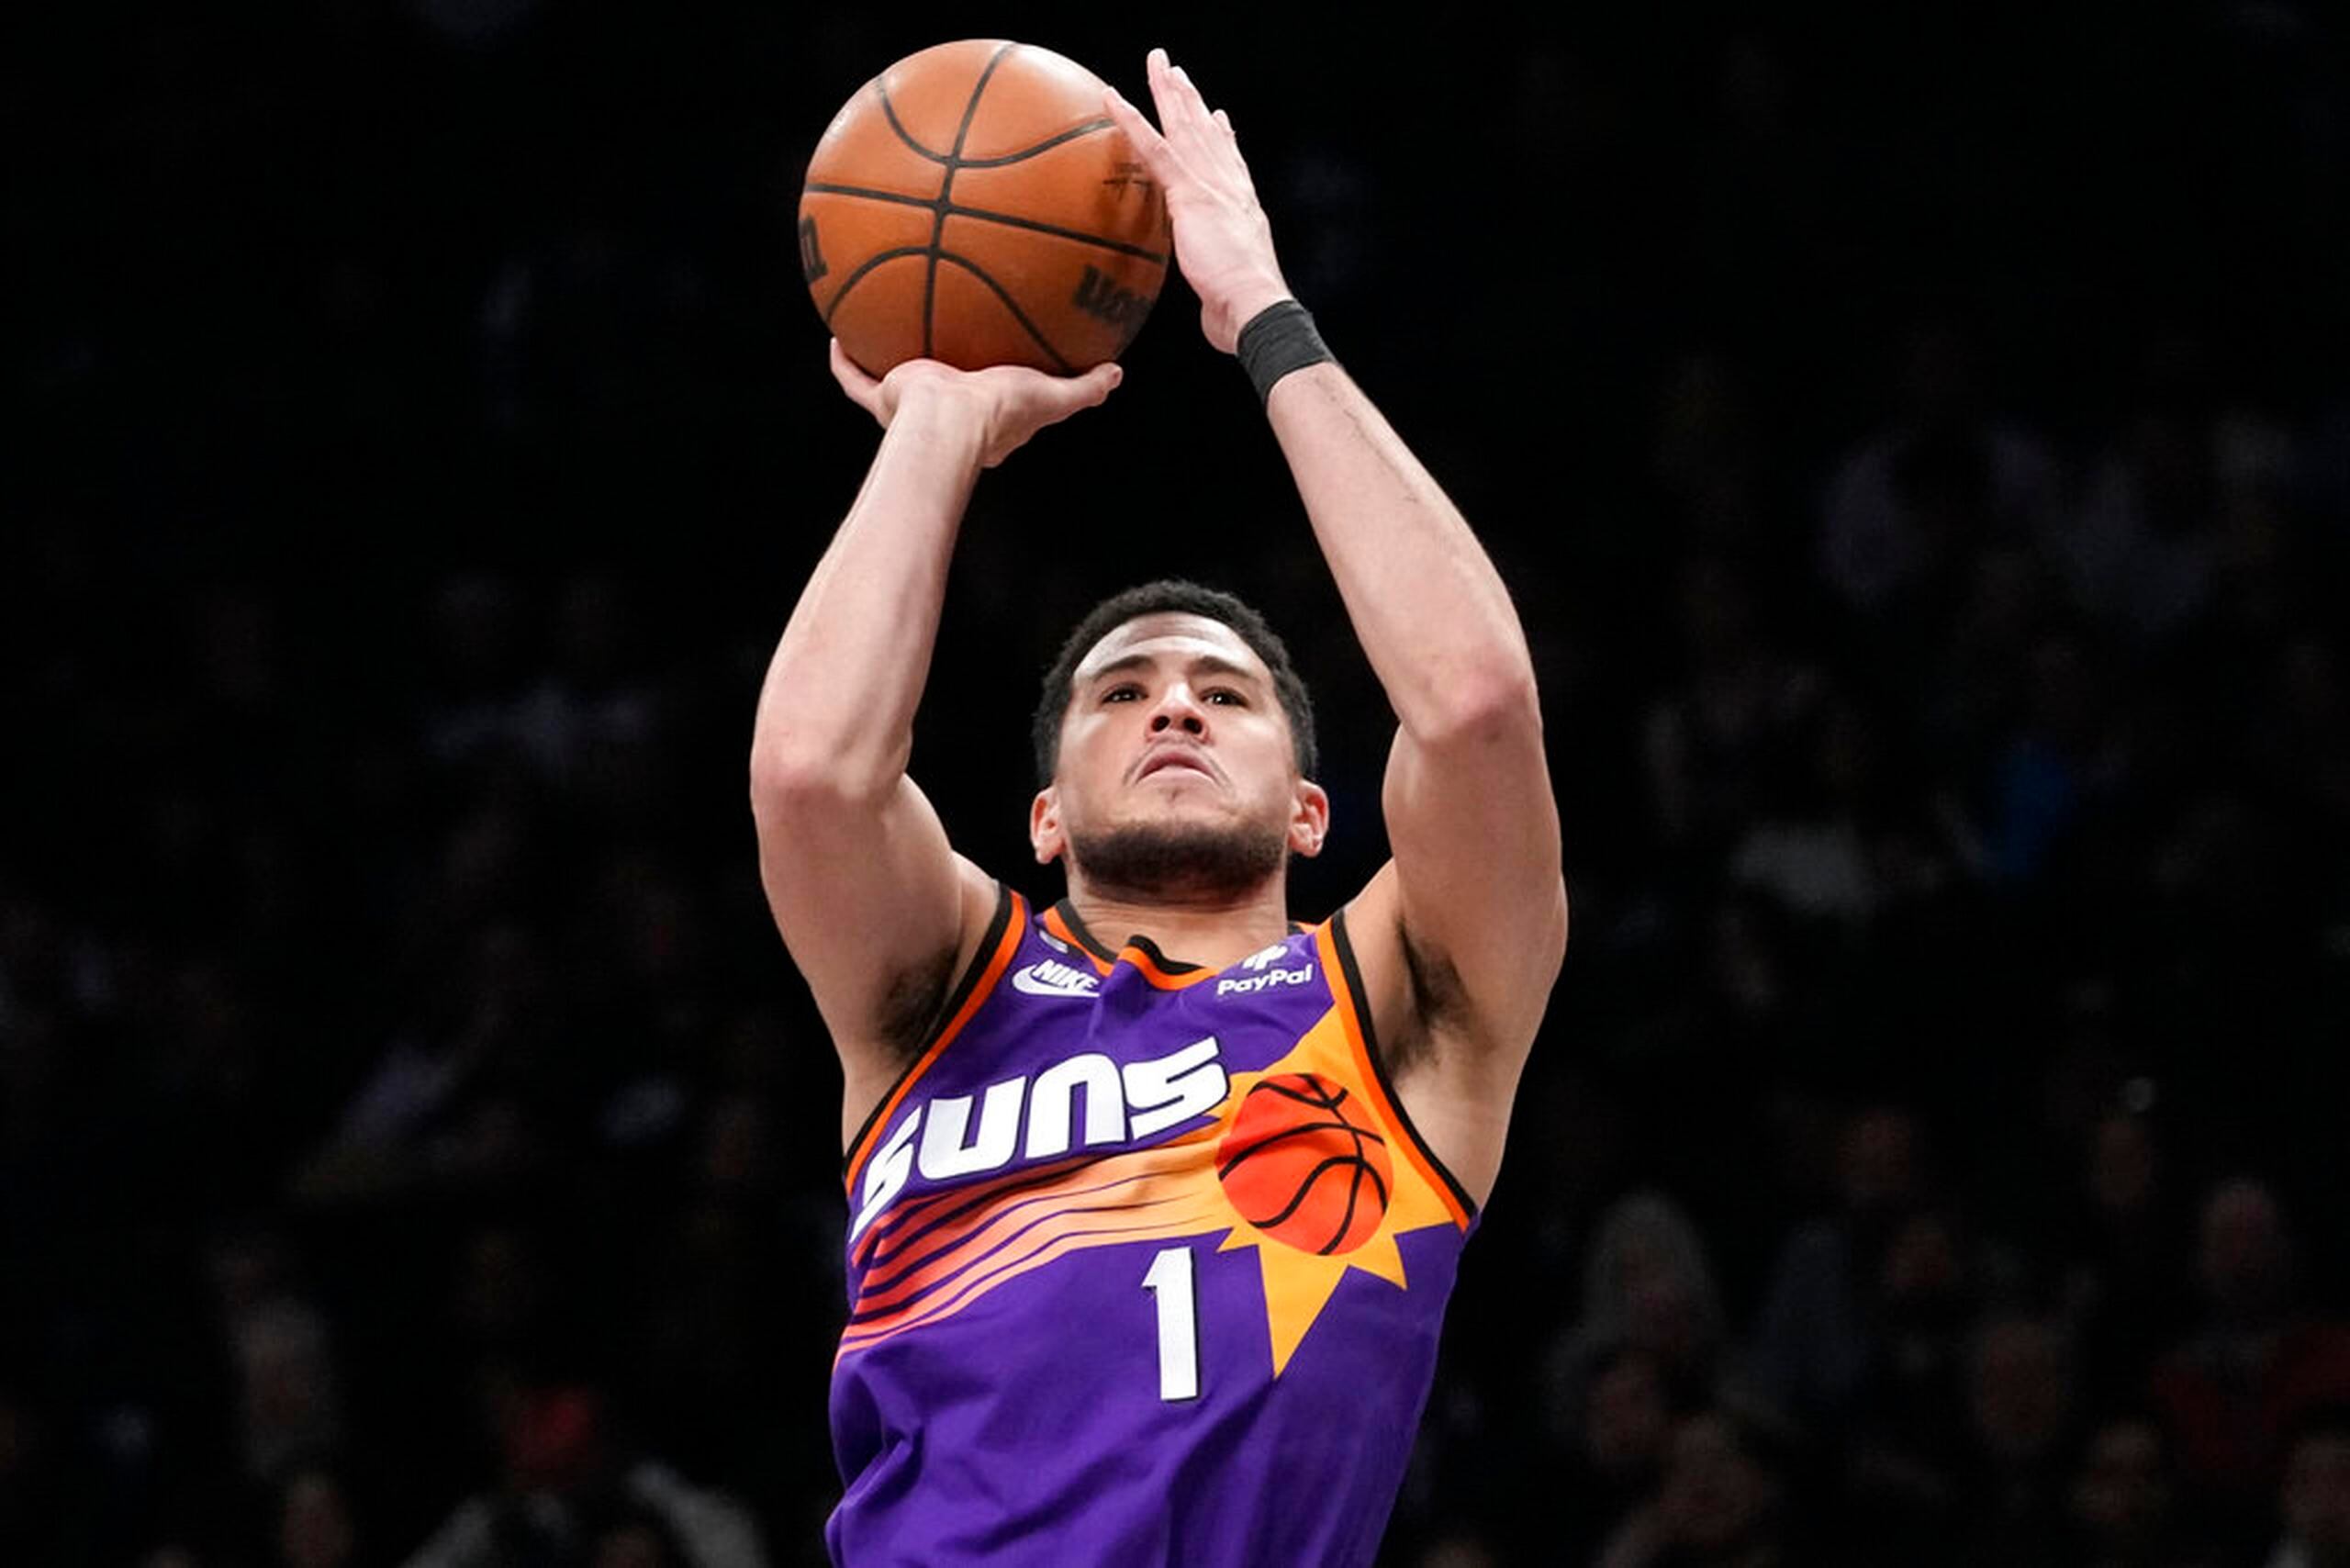 Devin Booker surpassed 12,000 points in the lineup 